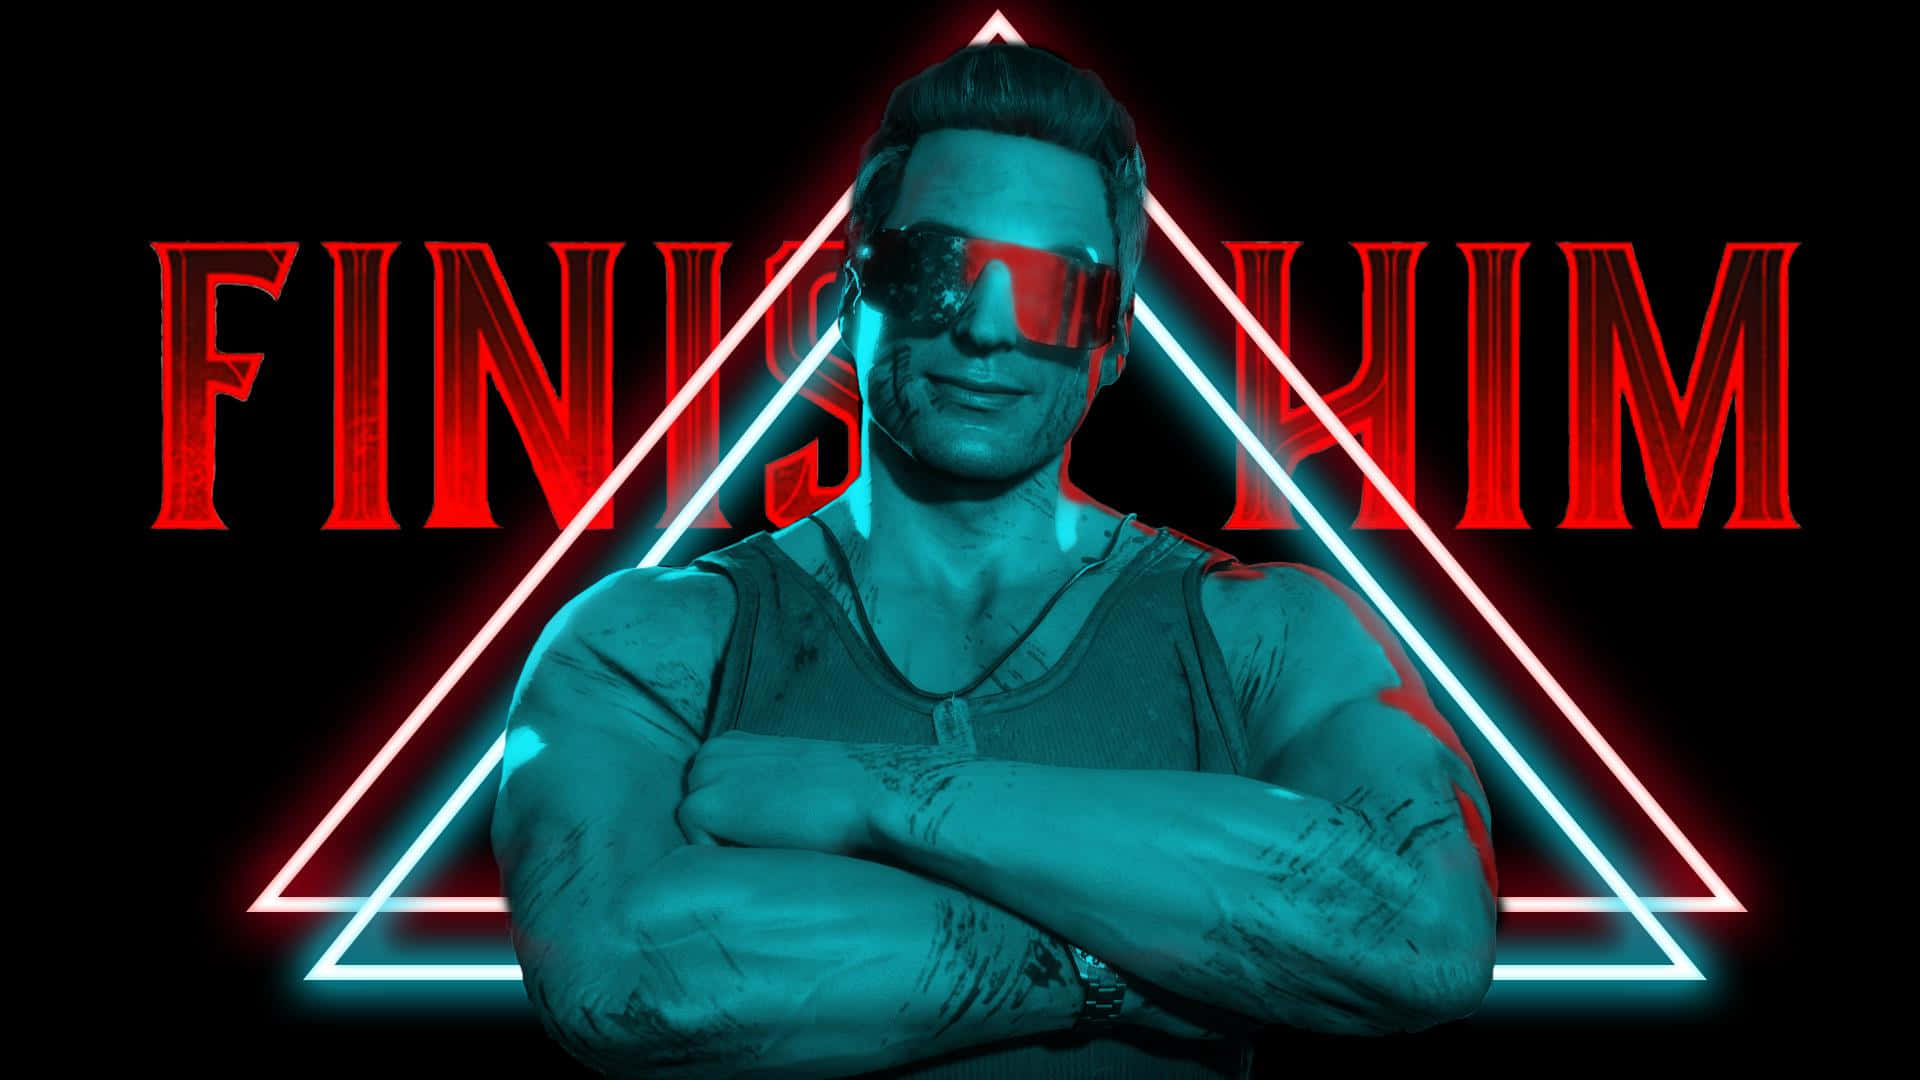 Johnny Cage in Action - A Fighter, A Showman Wallpaper